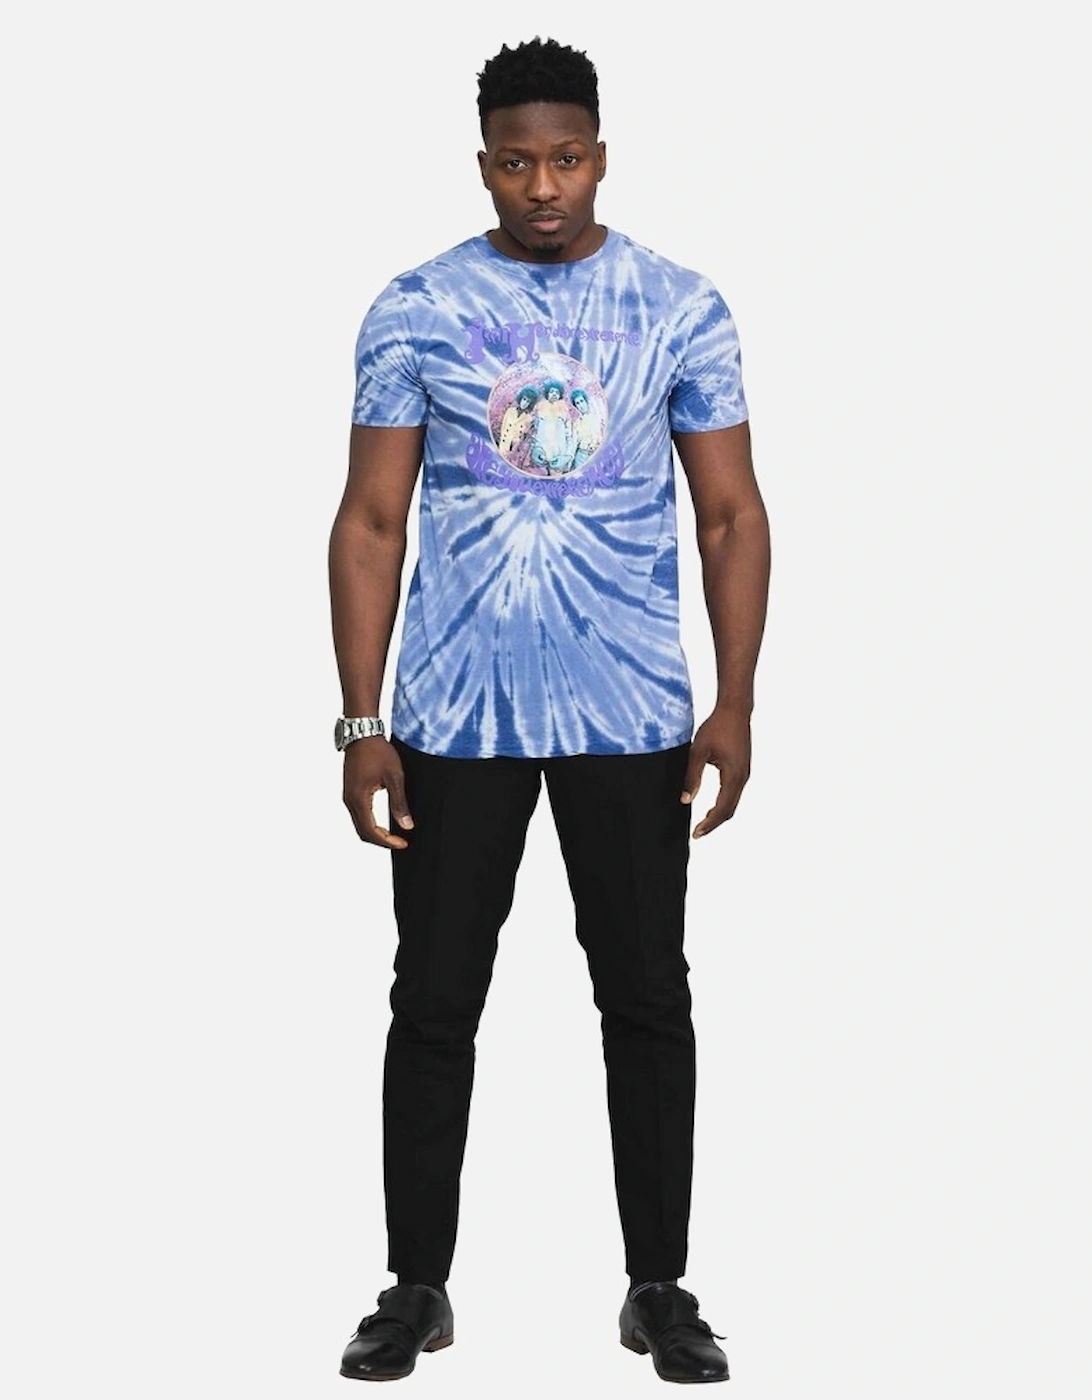 Unisex Adult Are You Experienced Tie Dye T-Shirt